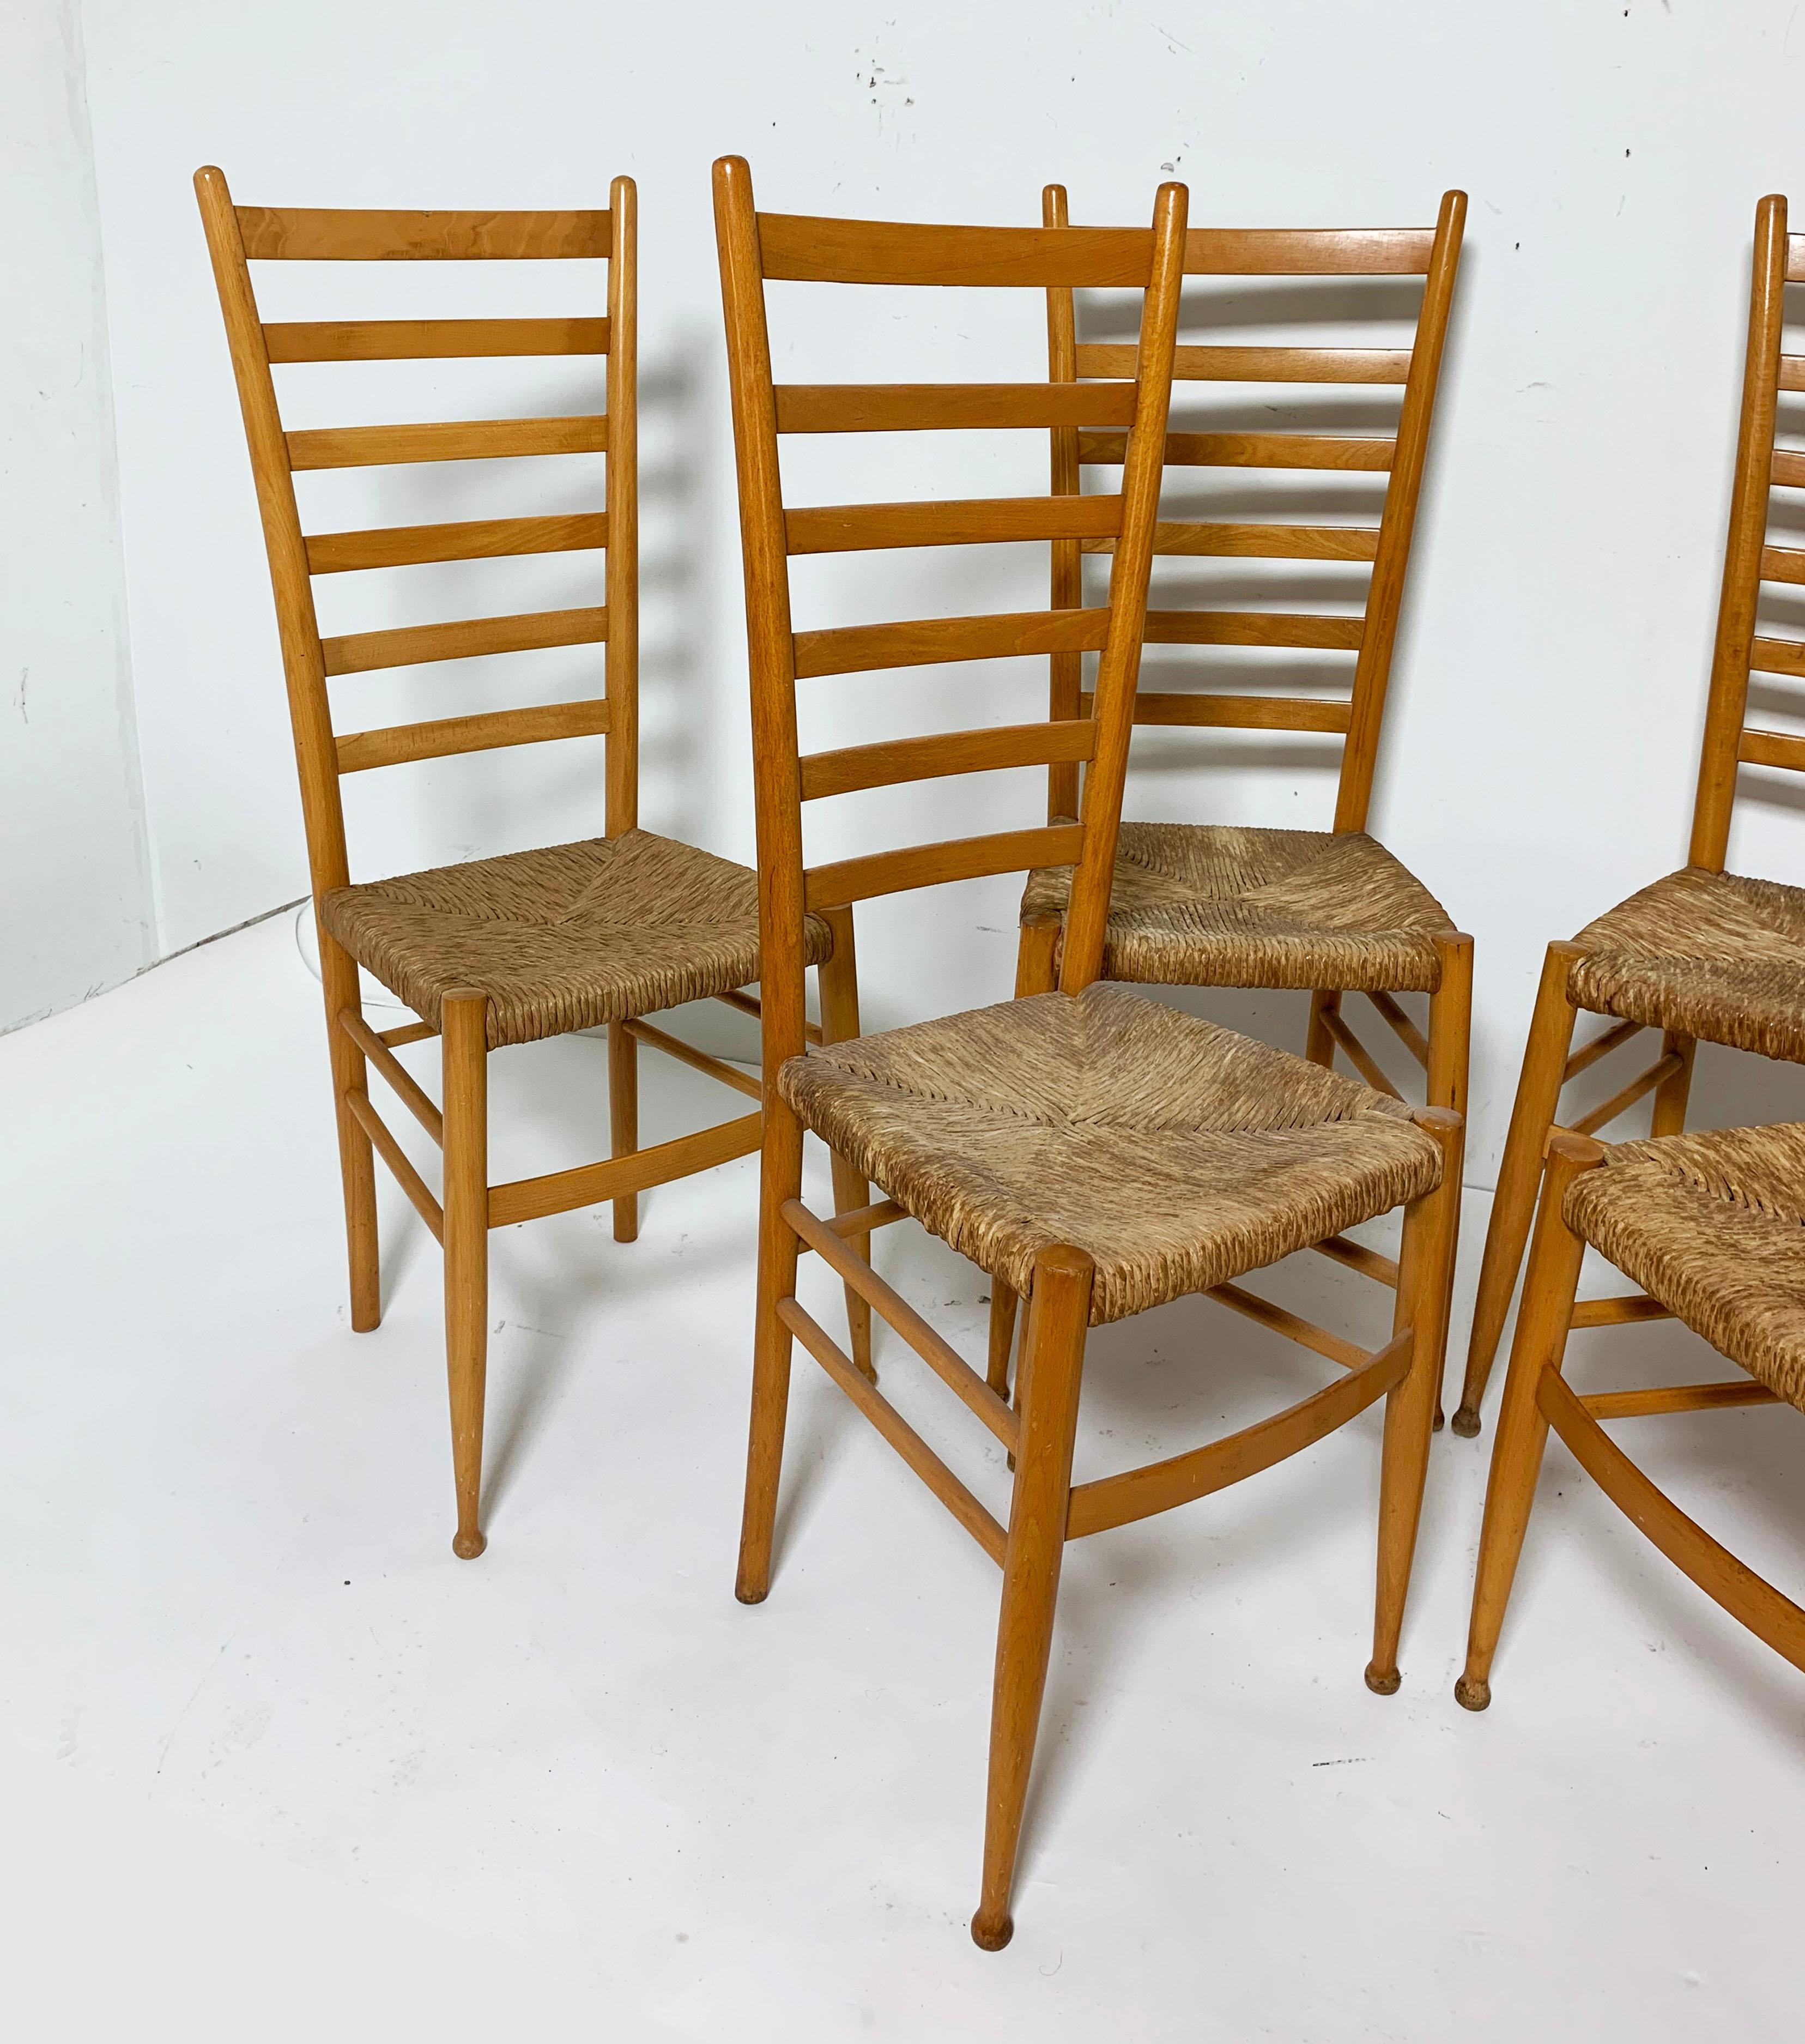 Set of six Italian ladder back dining chairs with woven rush seats in the manner of Gio Ponti, imported in the 1960s from the Chiavari region by Otto Gerdau.